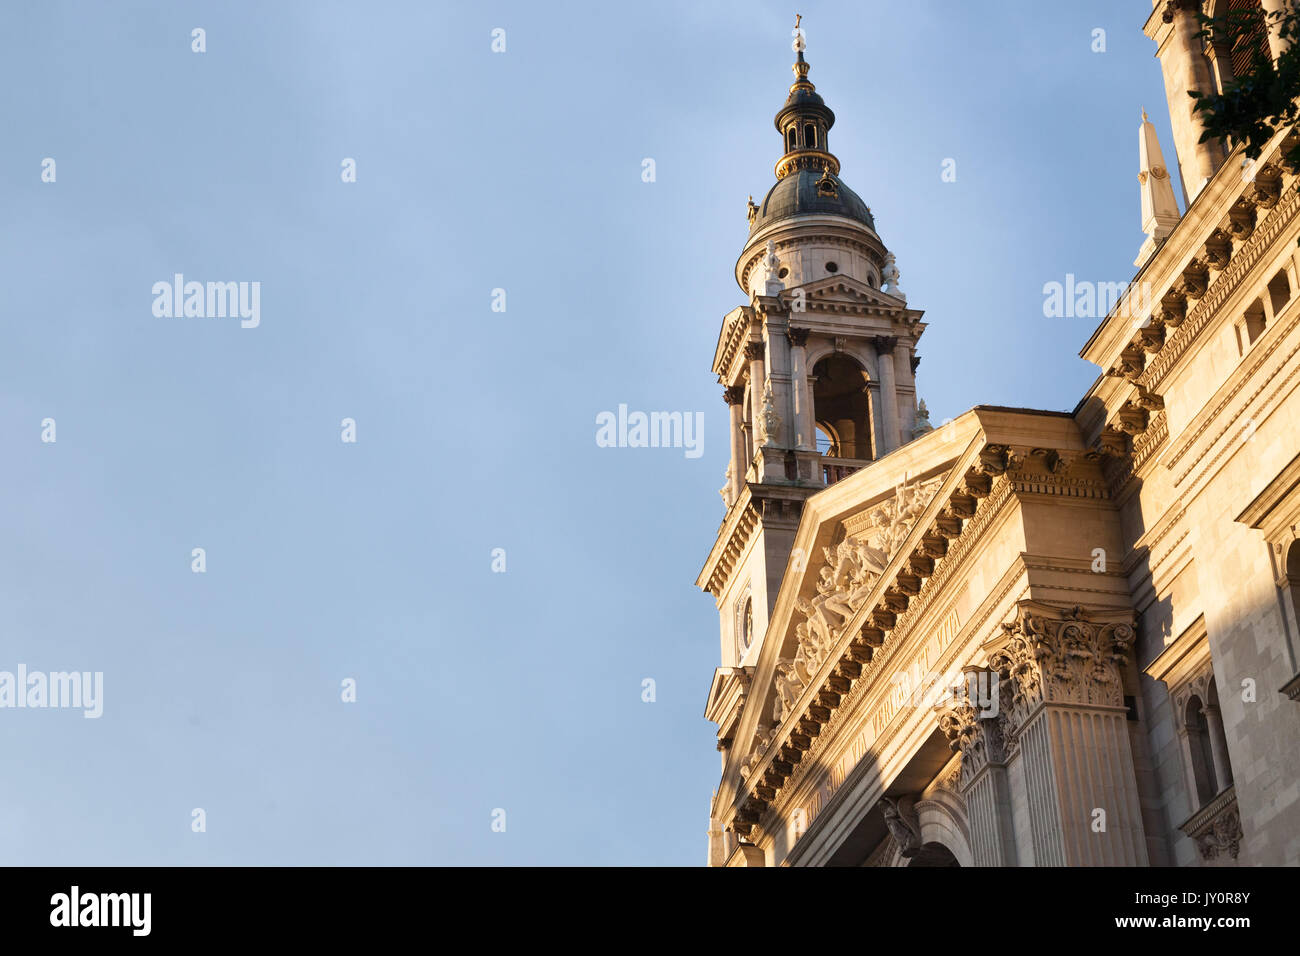 Szent Istvan Basilica, aka Saint Stephen Church taken during sunset. This Basilica is famous for being one of the greatest landmarks of the city cente Stock Photo